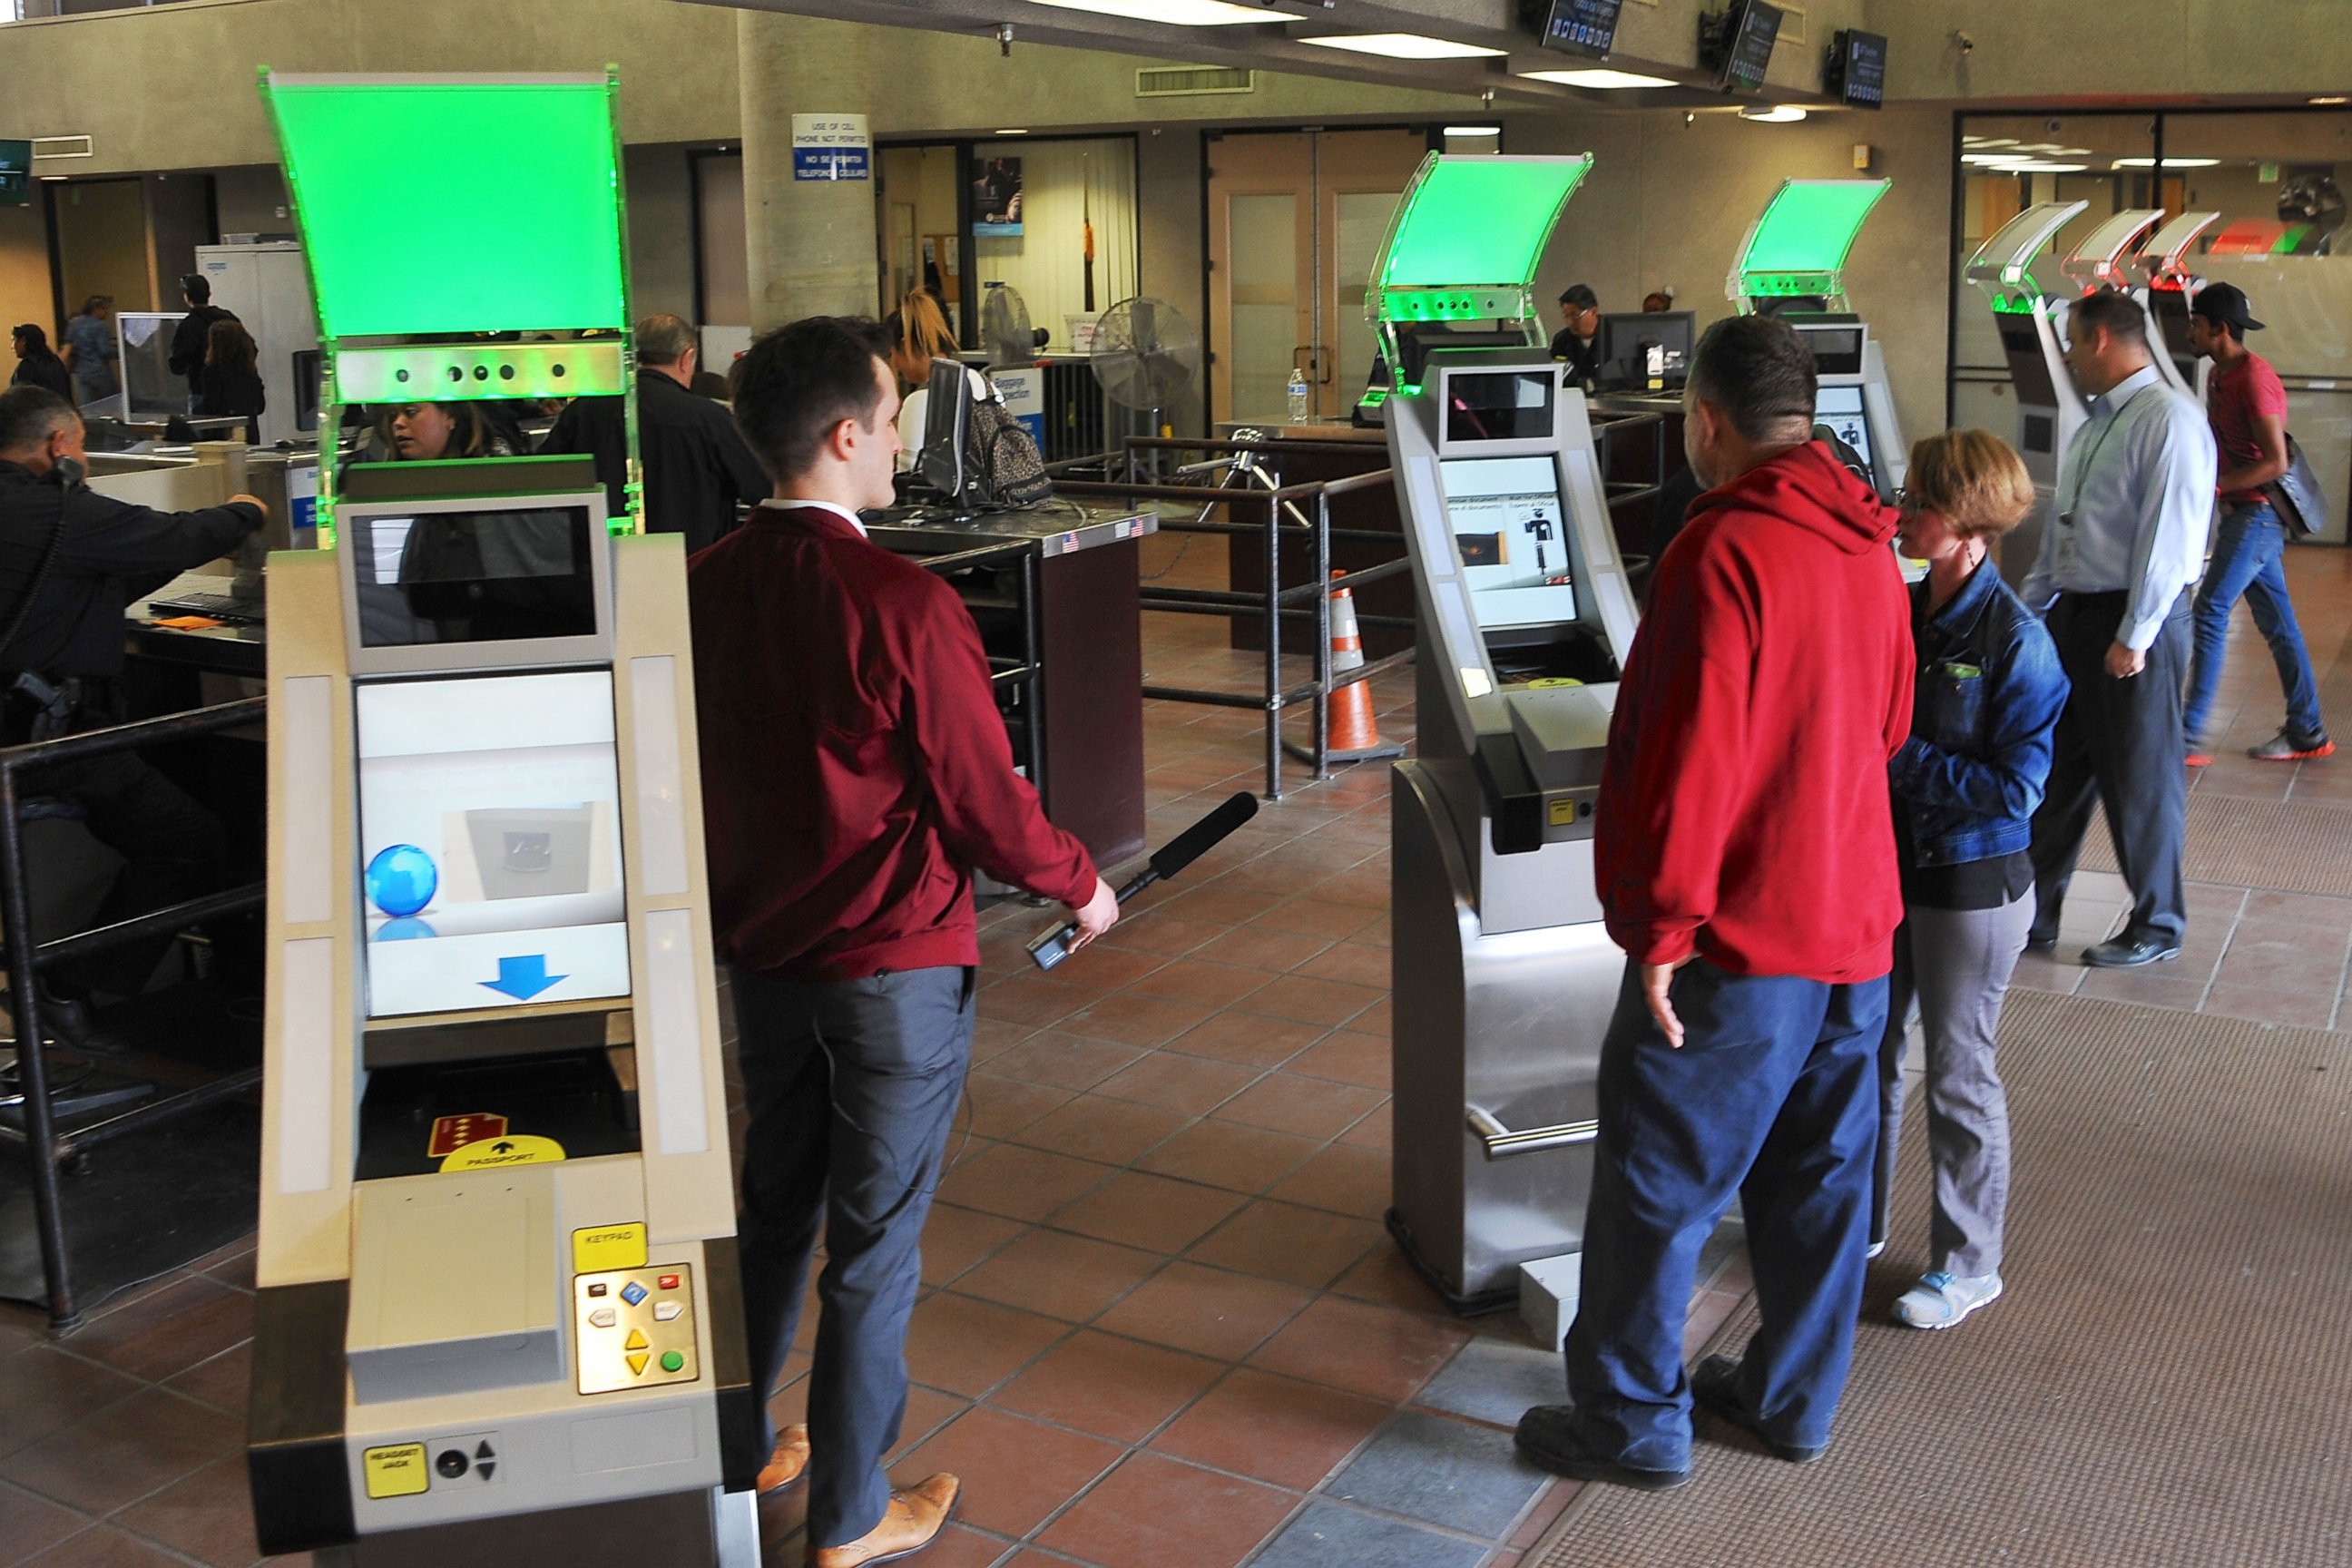 PHOTO: U.S. Customs and Border Protection test new biometric technologies with face and iris cameras at the Otay Mesa border pedestrian crossing in San Diego, Calif. on Dec. 10, 2015.